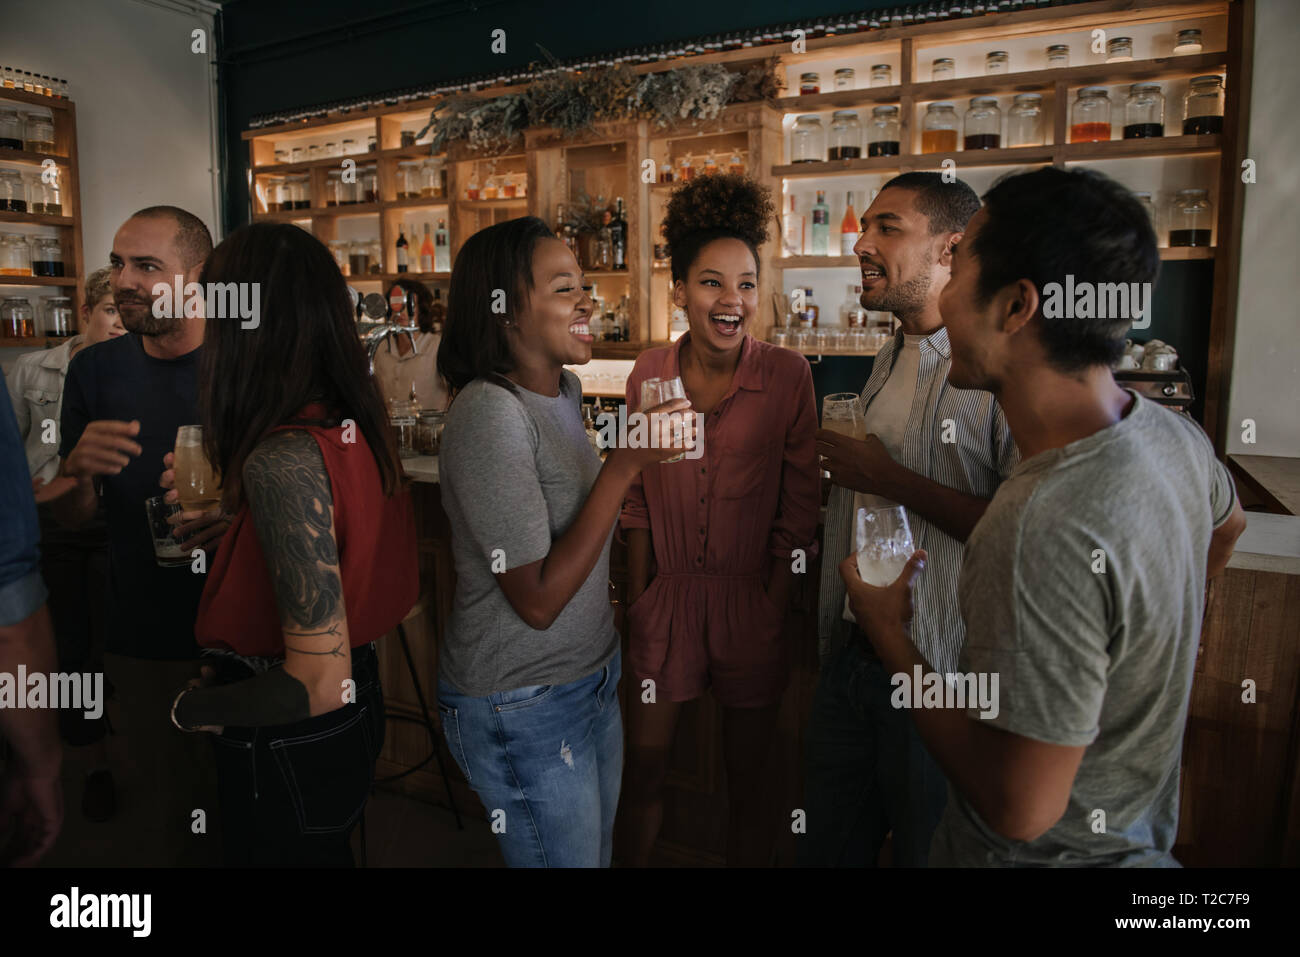 Group of diverse young friends having a fun evening out with drinks in a trendy bar Stock Photo